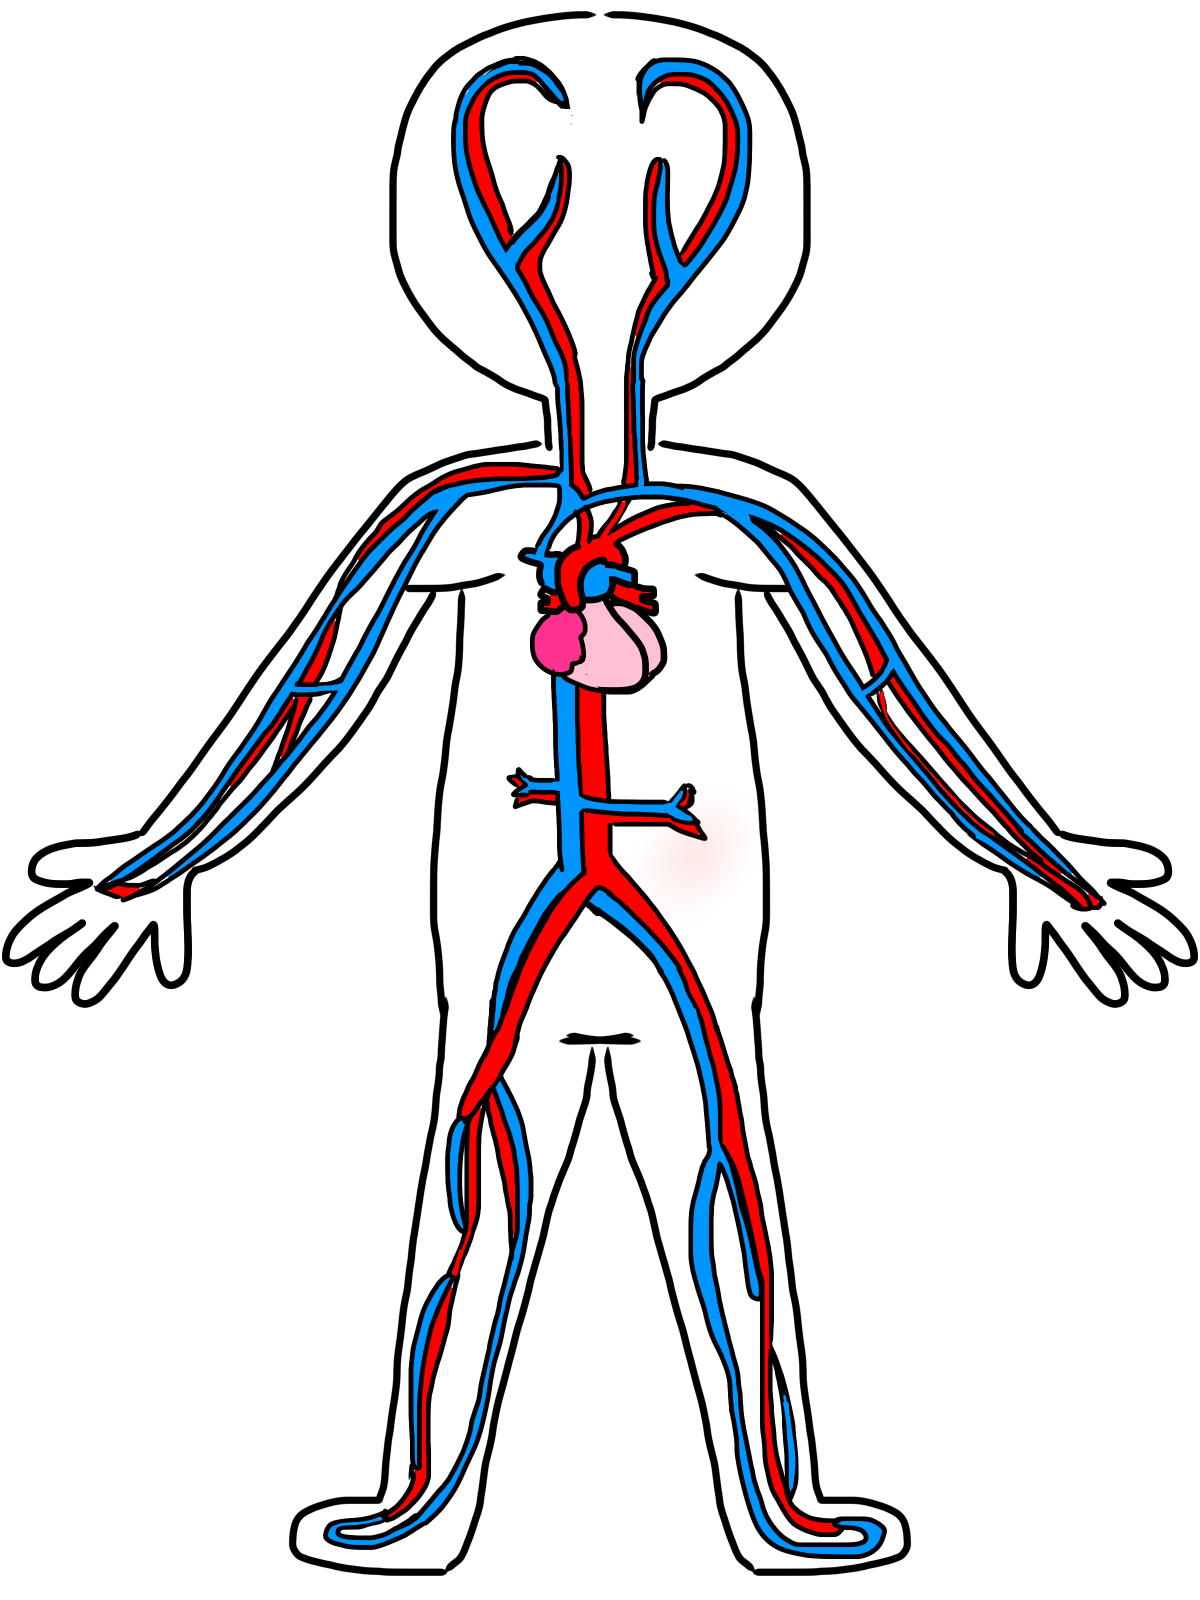  circulatory system kids. Handcuffs clipart easy drawing